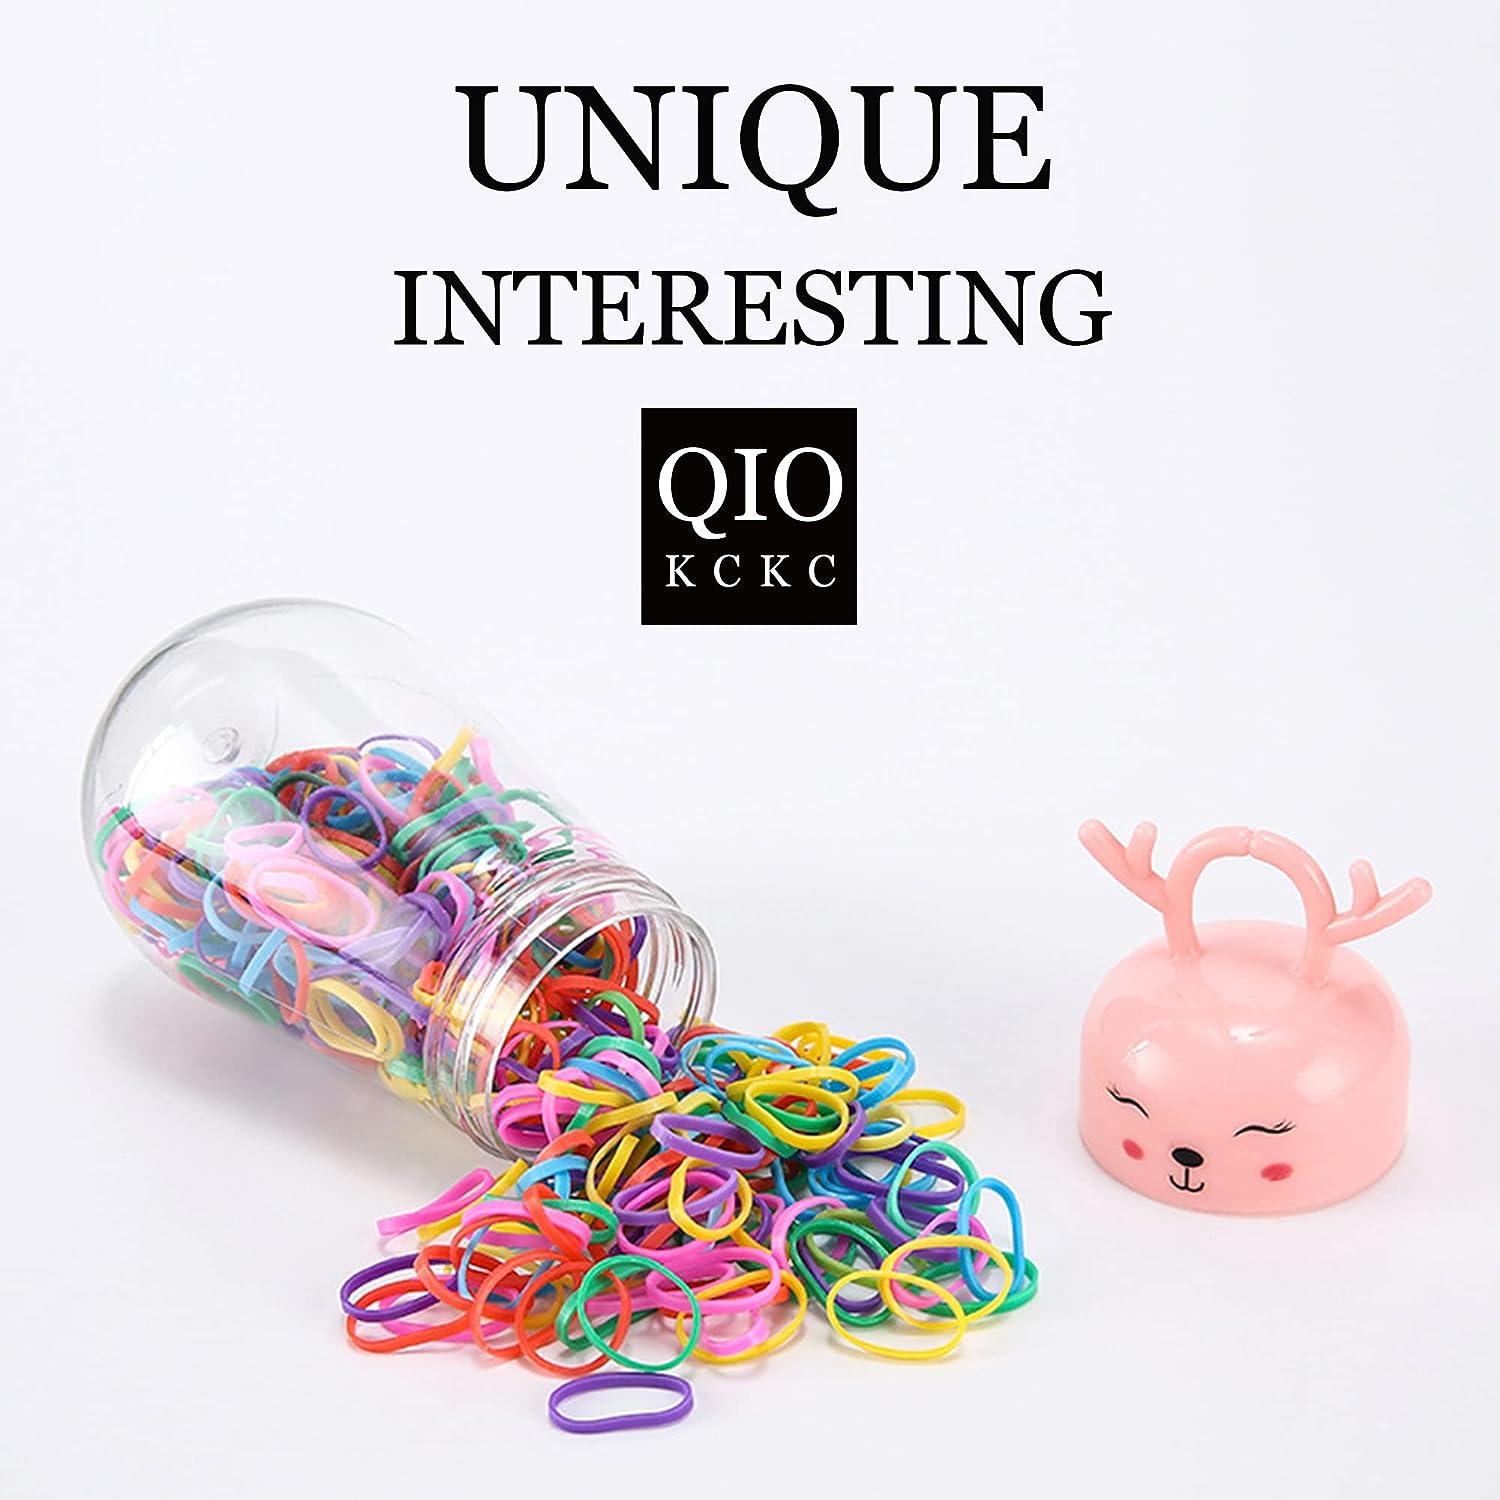 QIOKCKC 900 Tiny Rubber Bands Vibrant Color Mini Hair Ties with 3 Elk  Shaped Boxes Small Hair Elastics Little Hair Ties for Hair Elk Vibrant Color